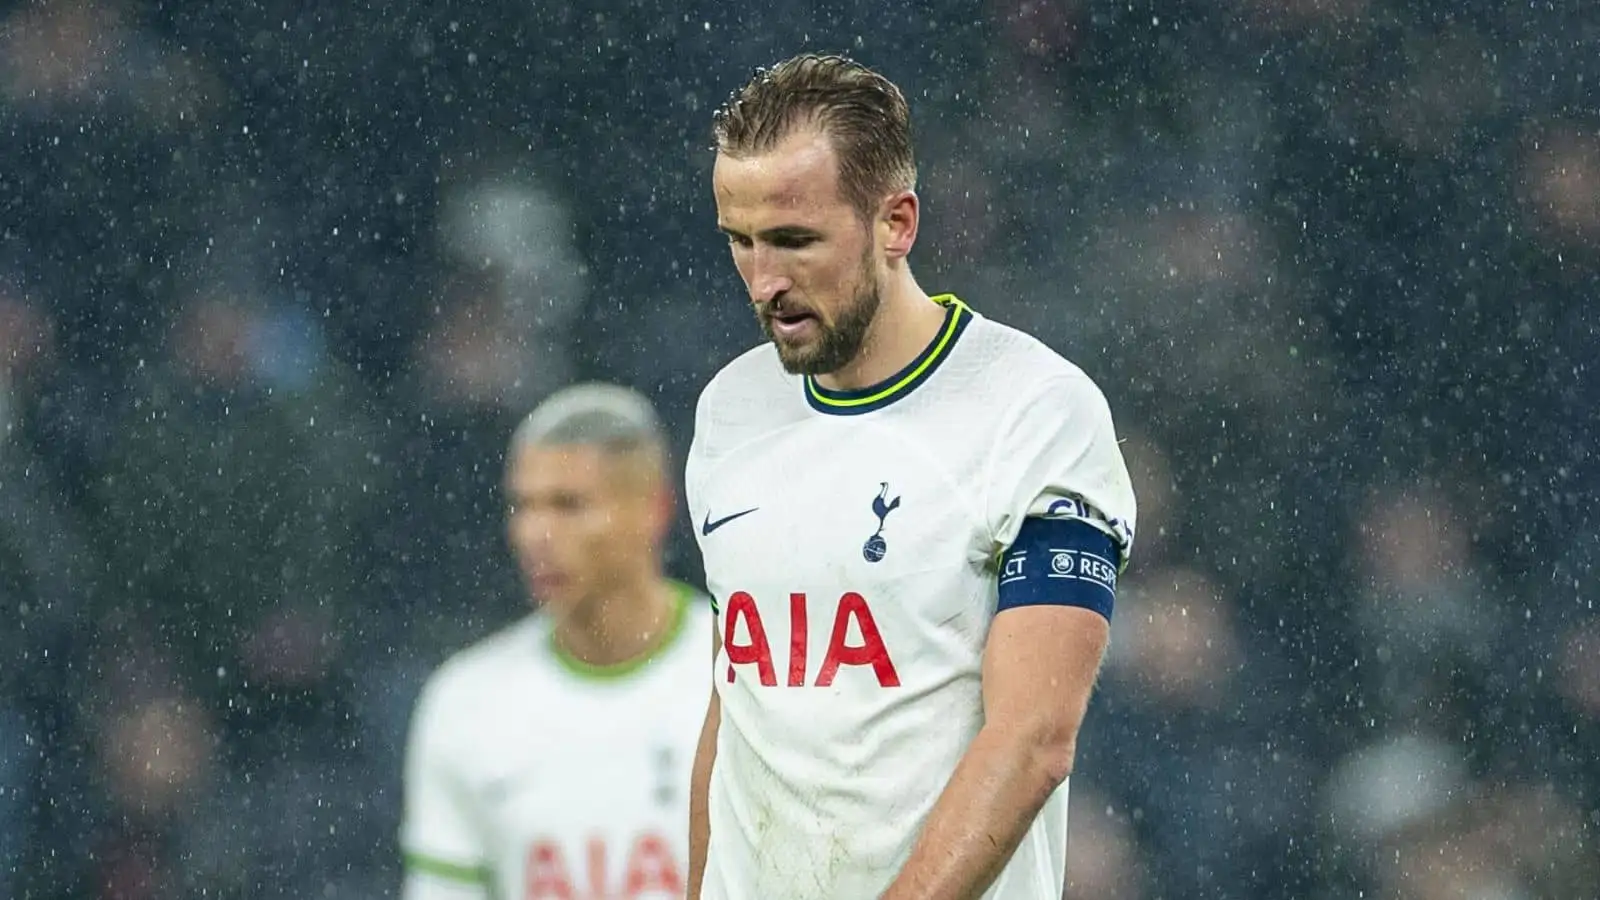 Tottenham Hotspur's Harry Kane looks dejected after the UEFA Champions League Round of 16 2nd Leg match between Tottenham Hotspur and AC Milan in London